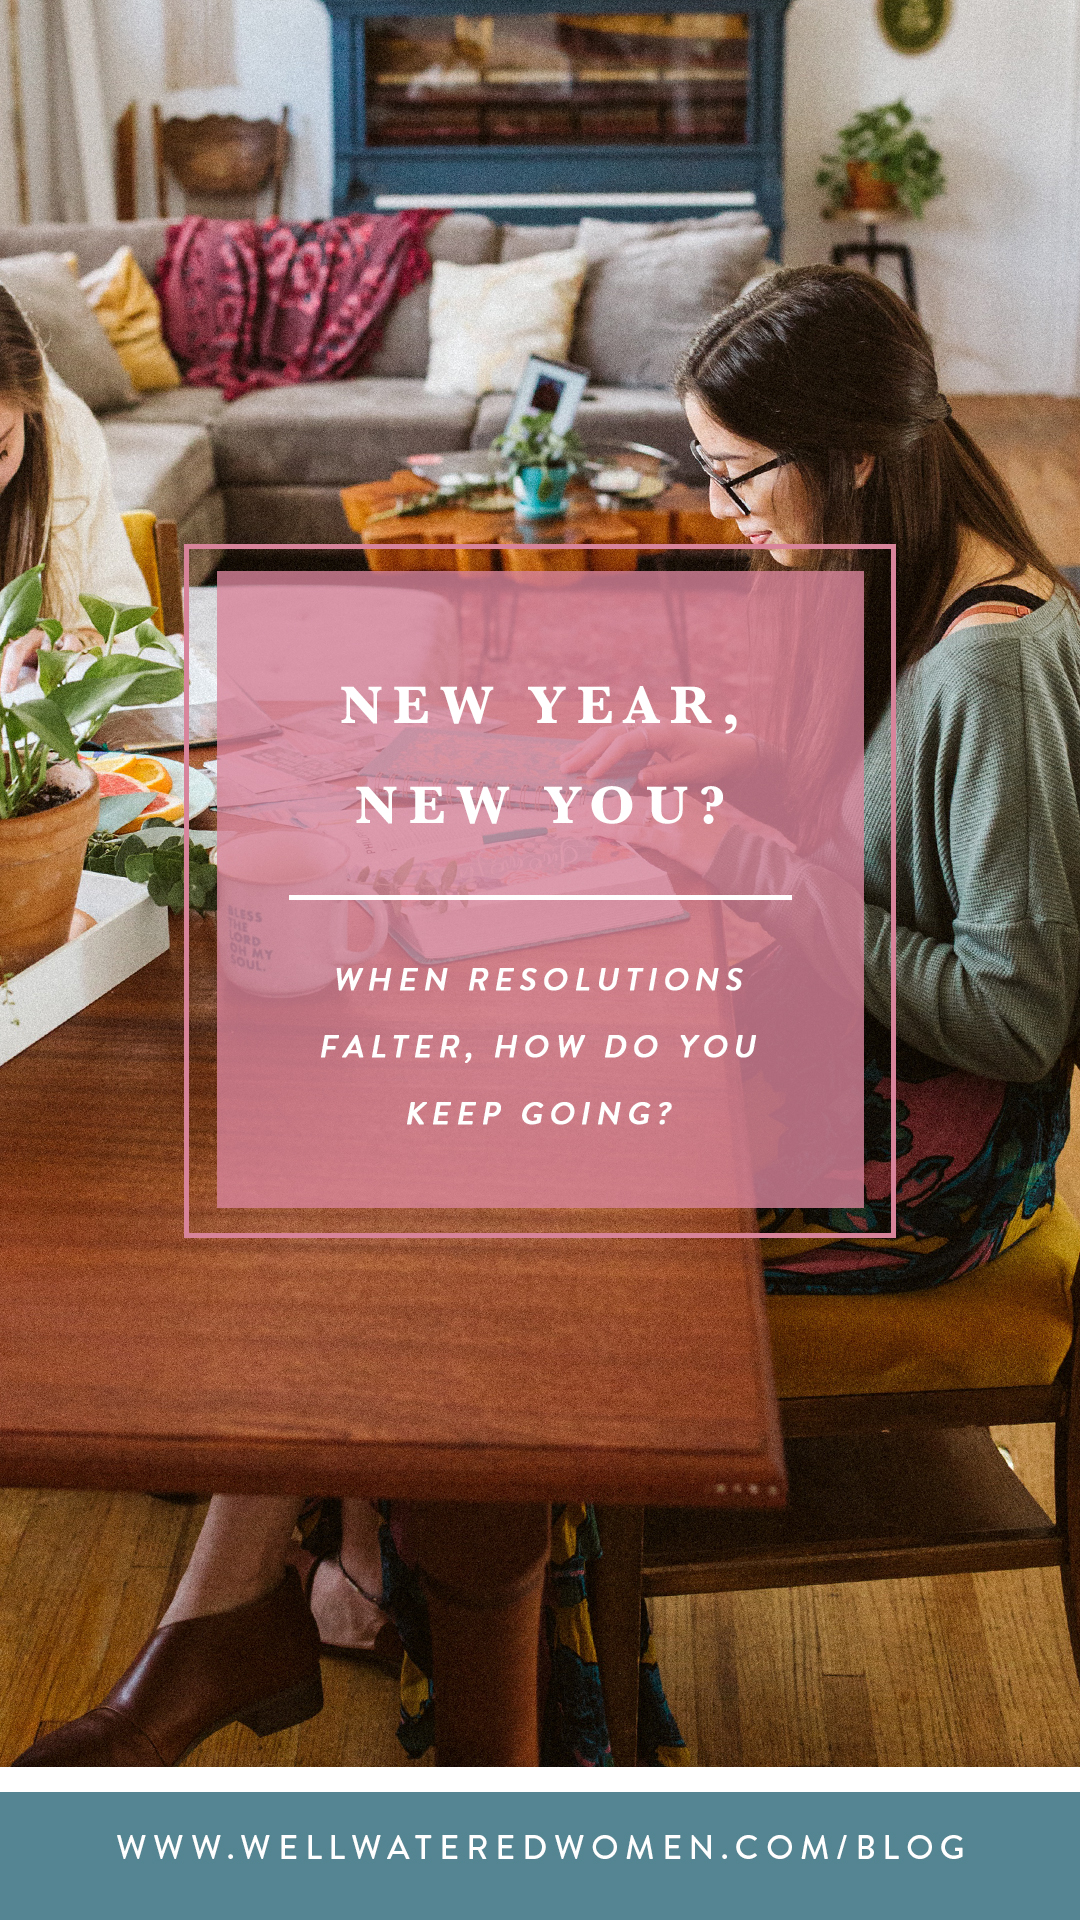 New Year, New You: When resolutions and goals feel like they are failing, how do you keep going?